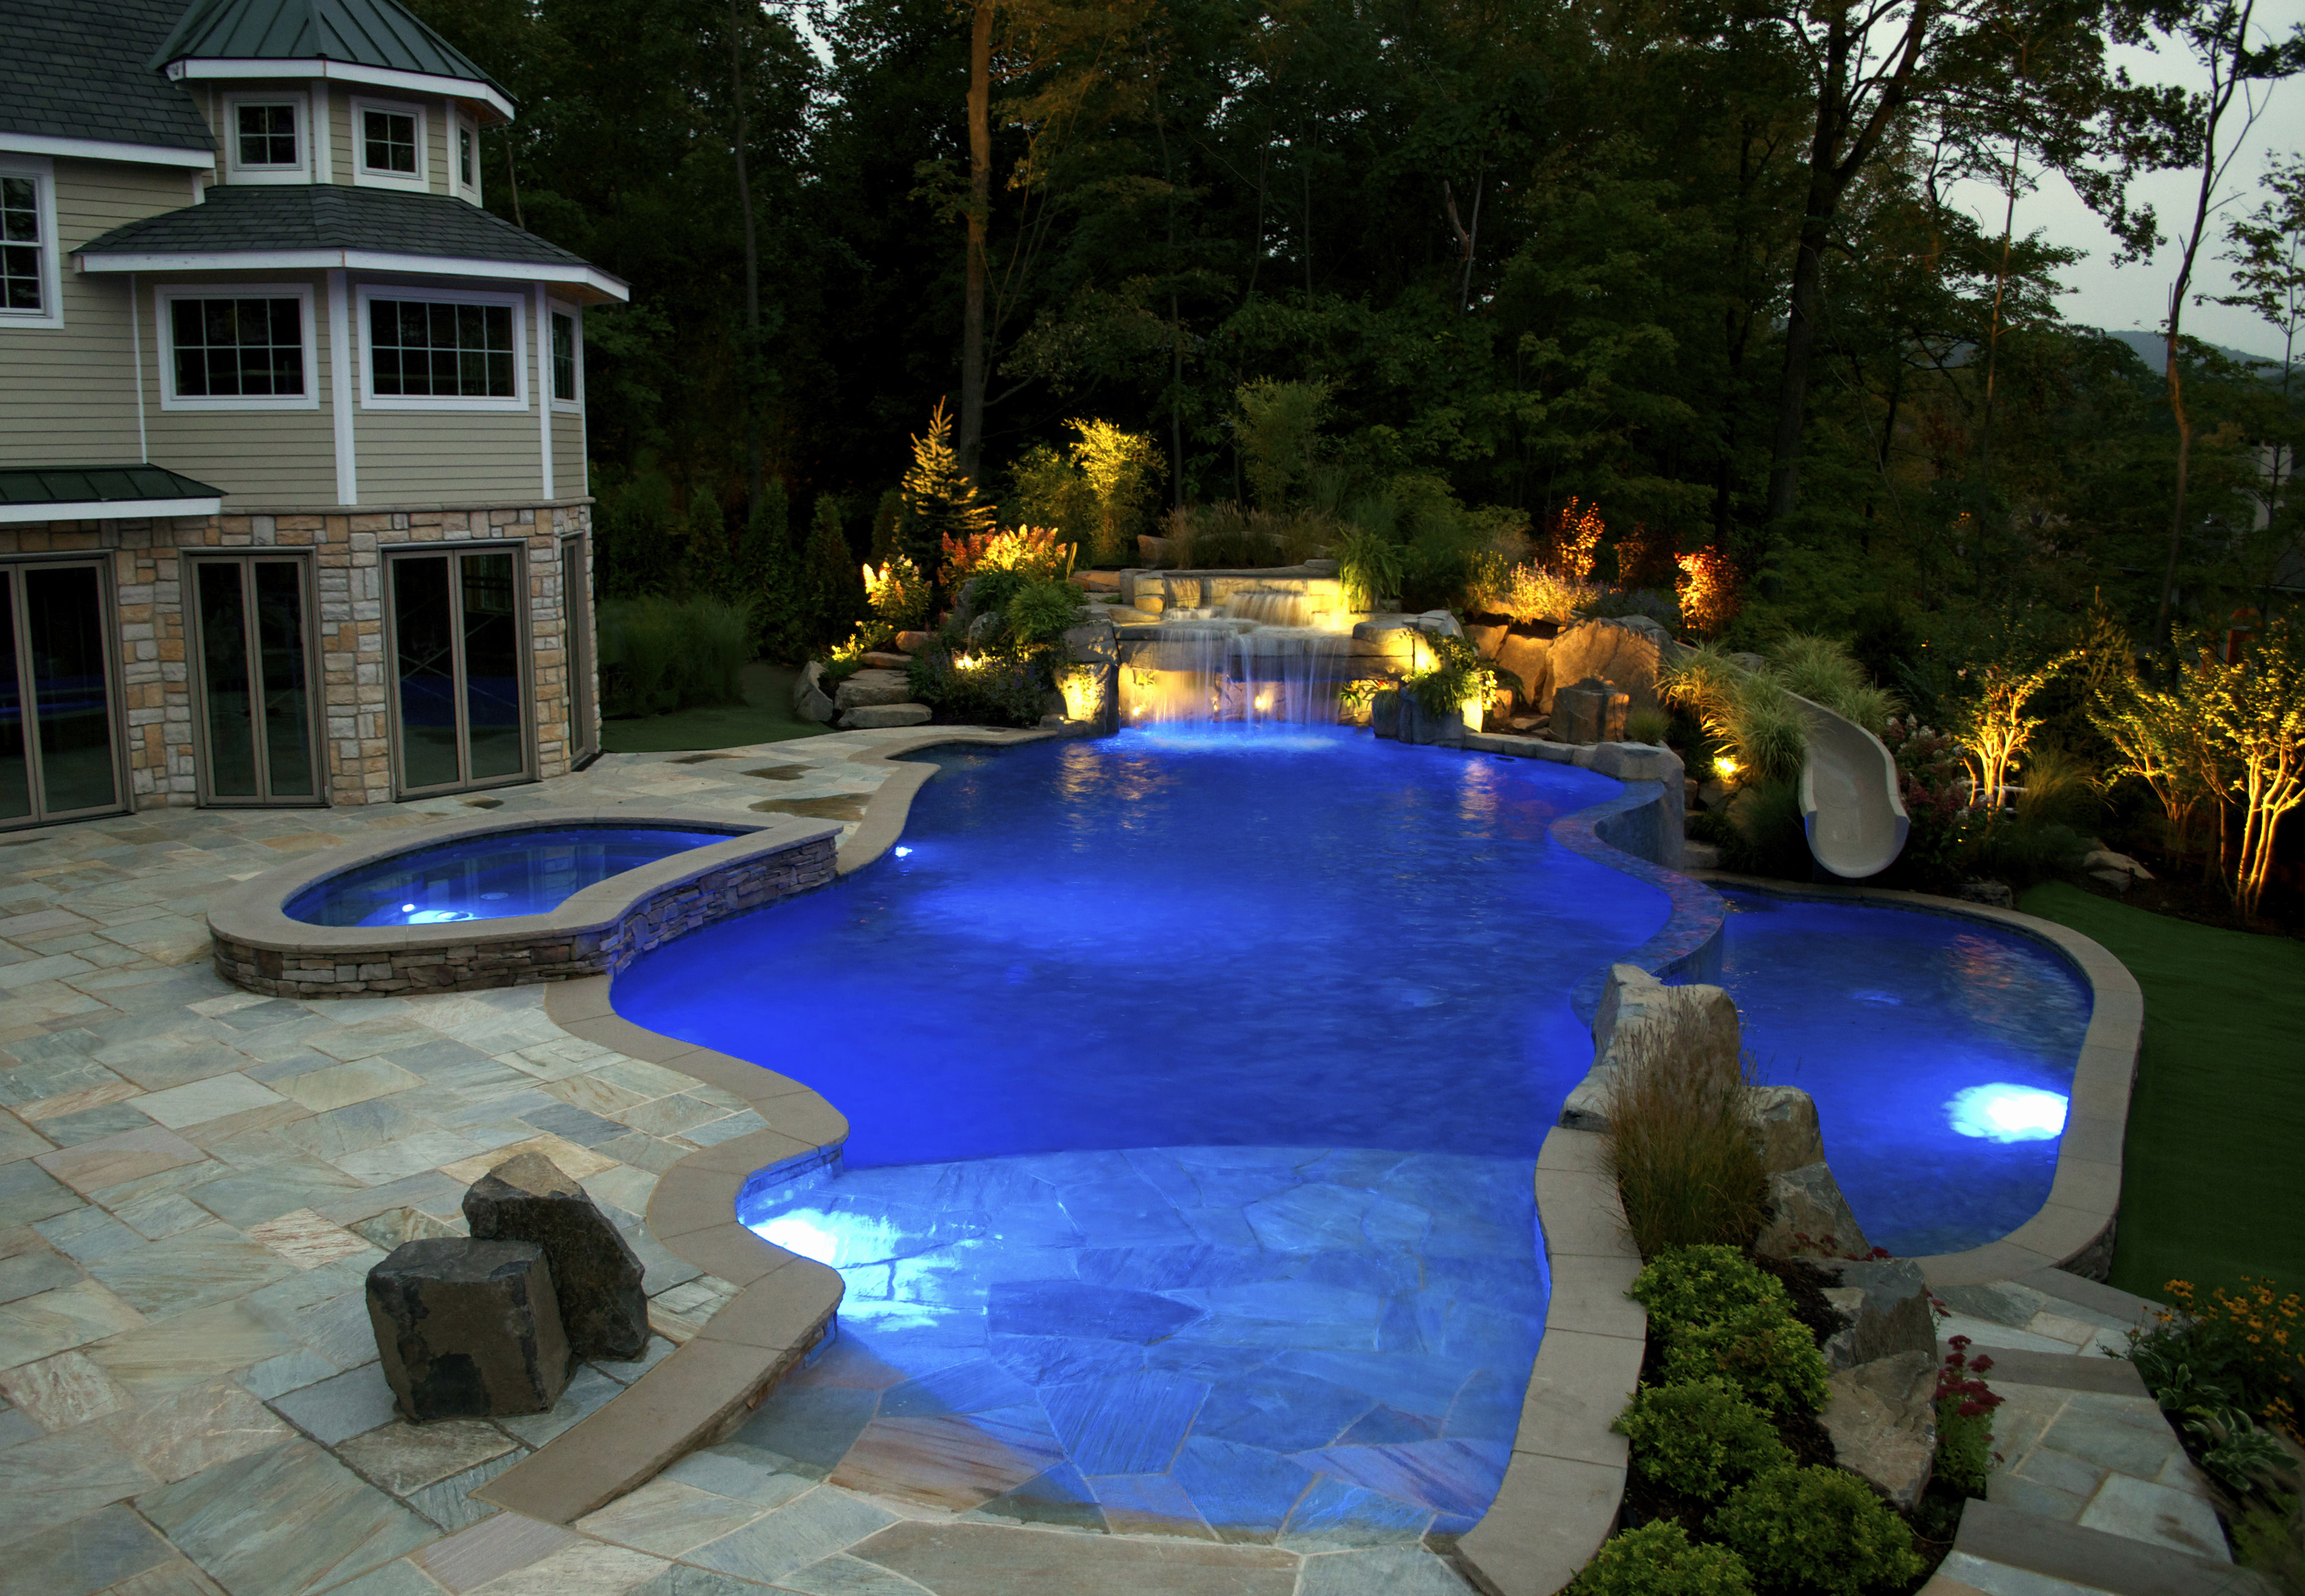 Nj Pool Company Debuts New Pool Features For Luxury